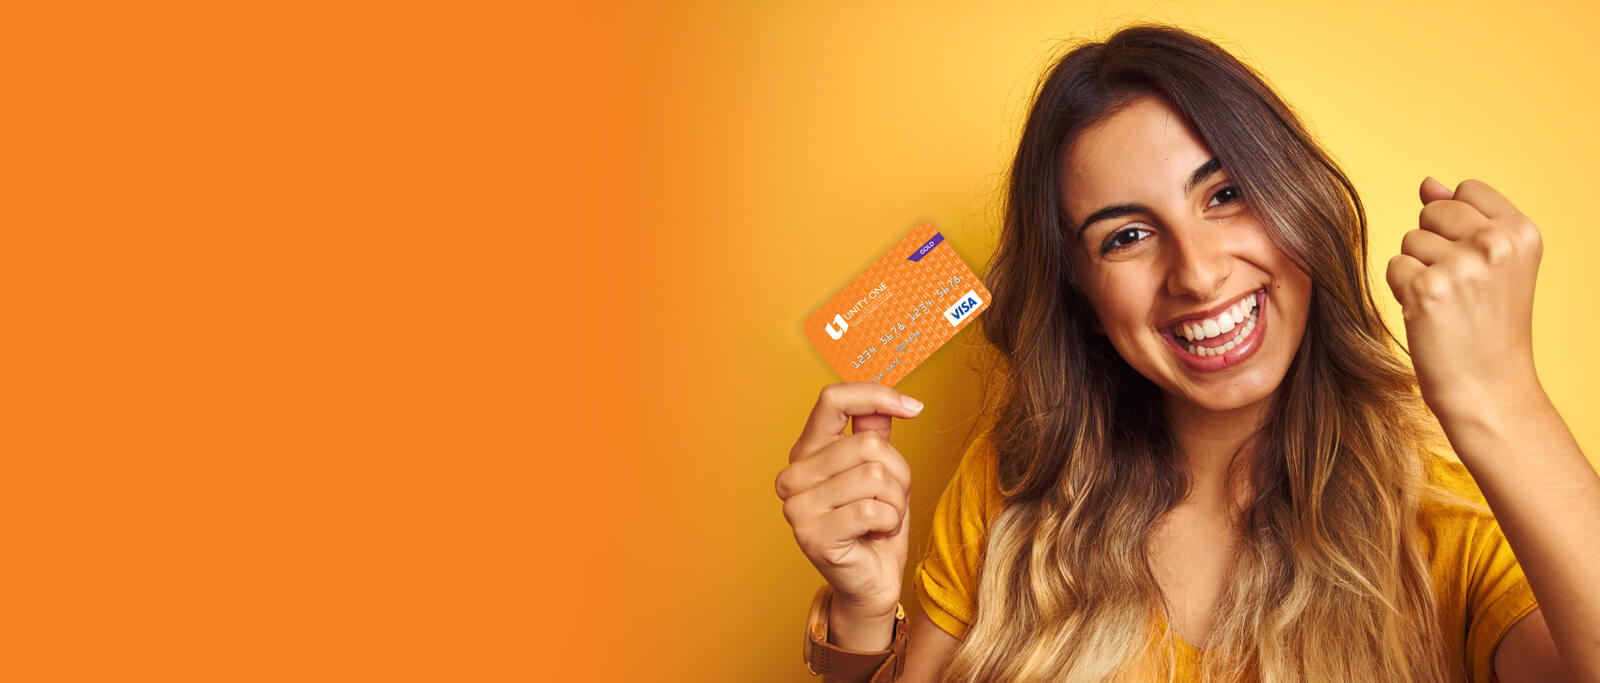 Girl with credit card